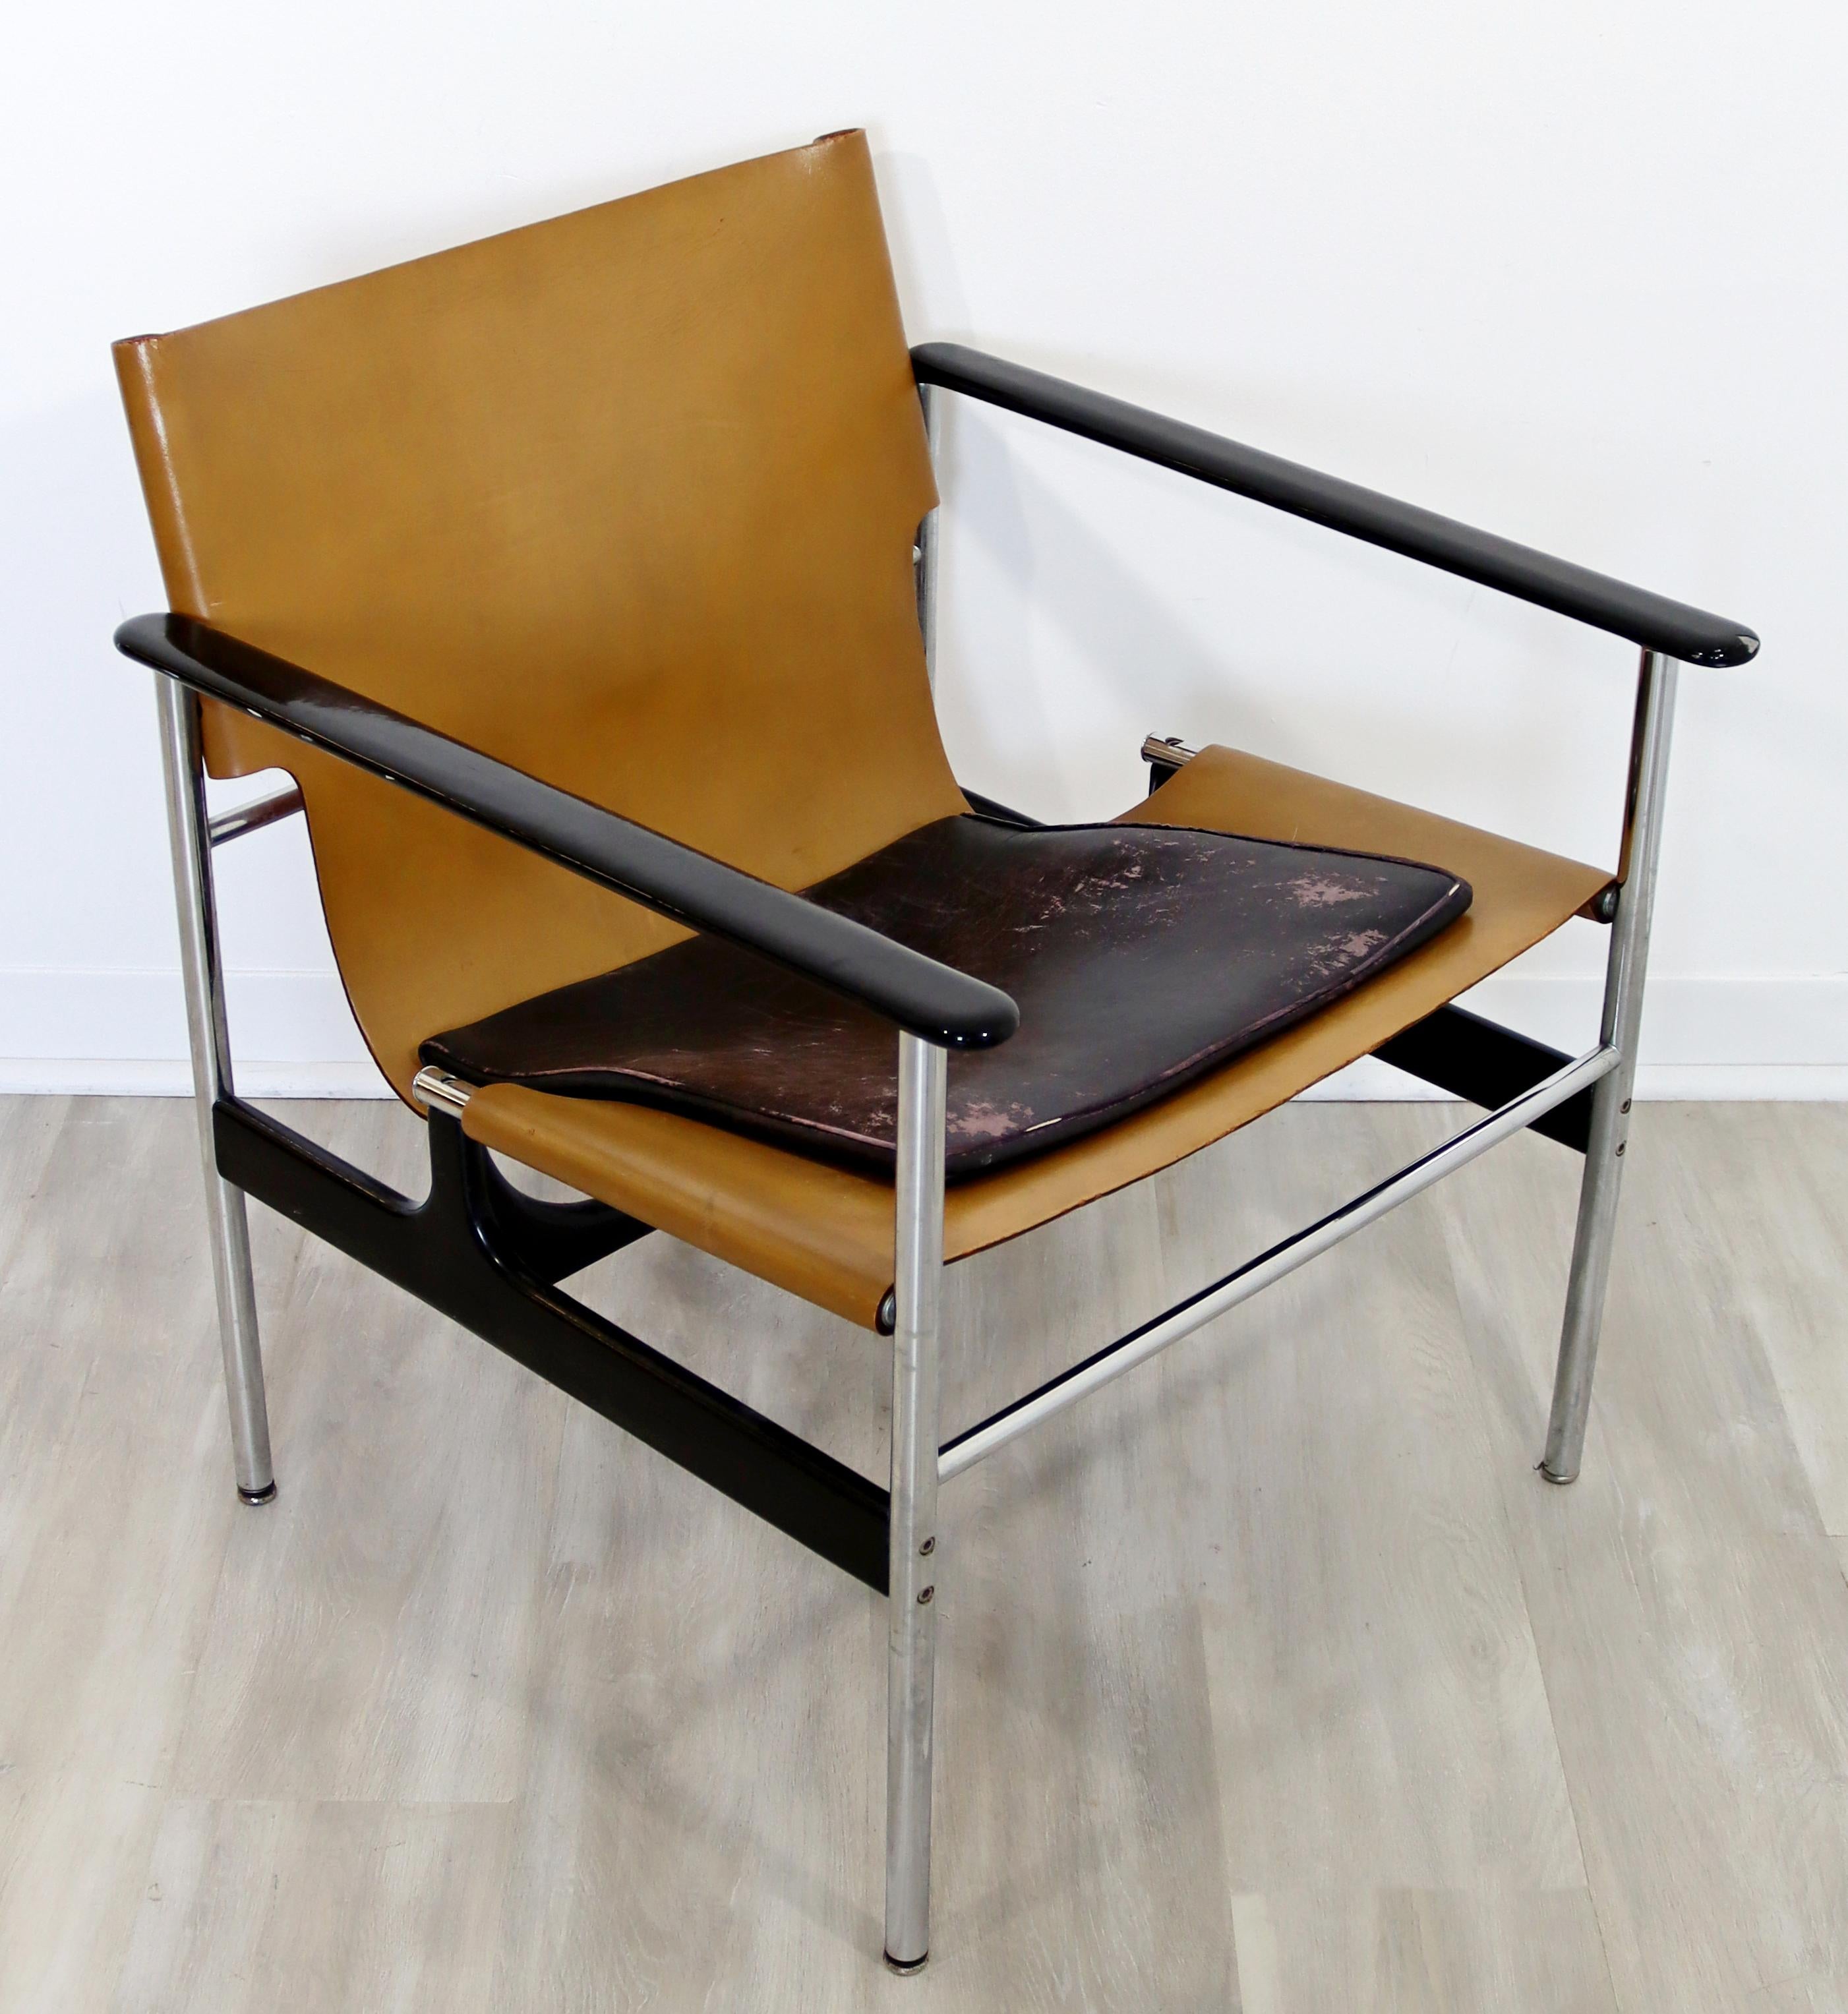 For your consideration is a spectacular, leather and chrome, sling lounge chair, by Charles Pollock for Knoll, circa the 1960s. In very good vintage condition. The dimensions are 24.5